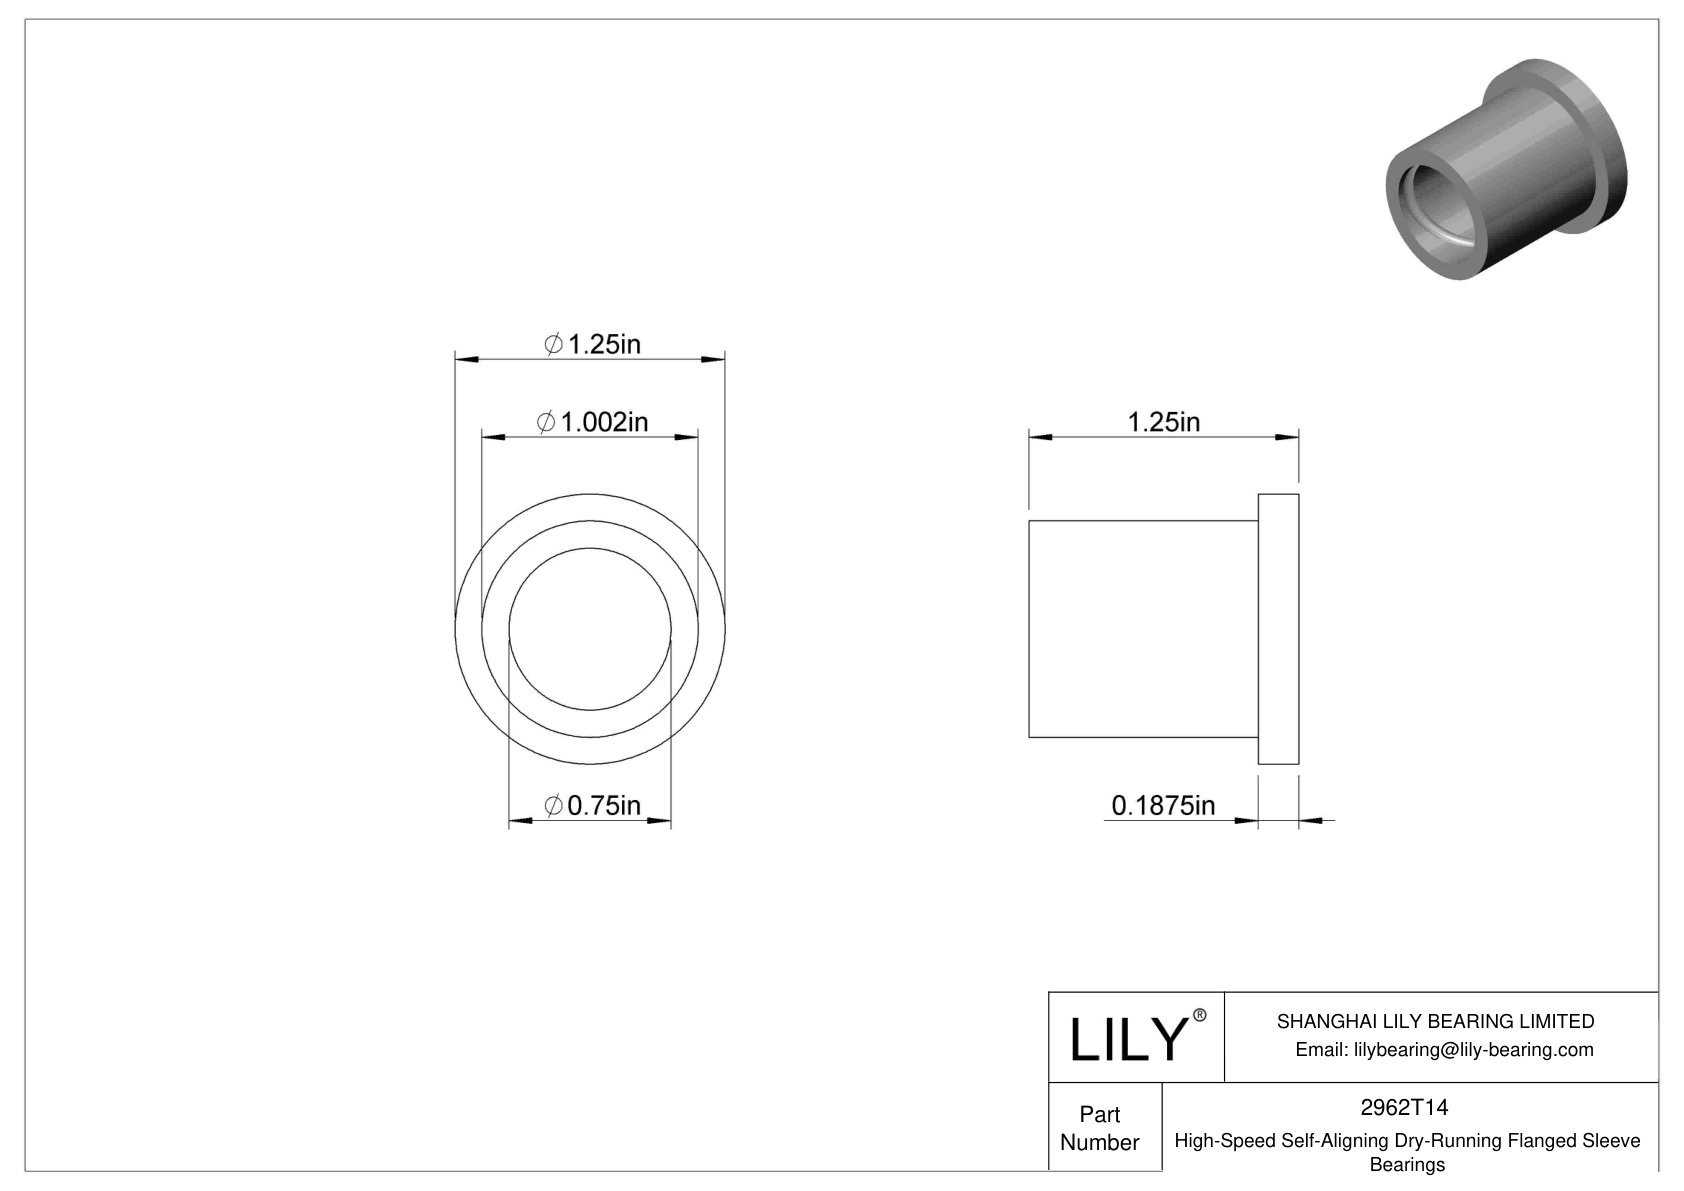 CJGCTBE High-Temperature Dry-Running Flanged Sleeve Bearings cad drawing